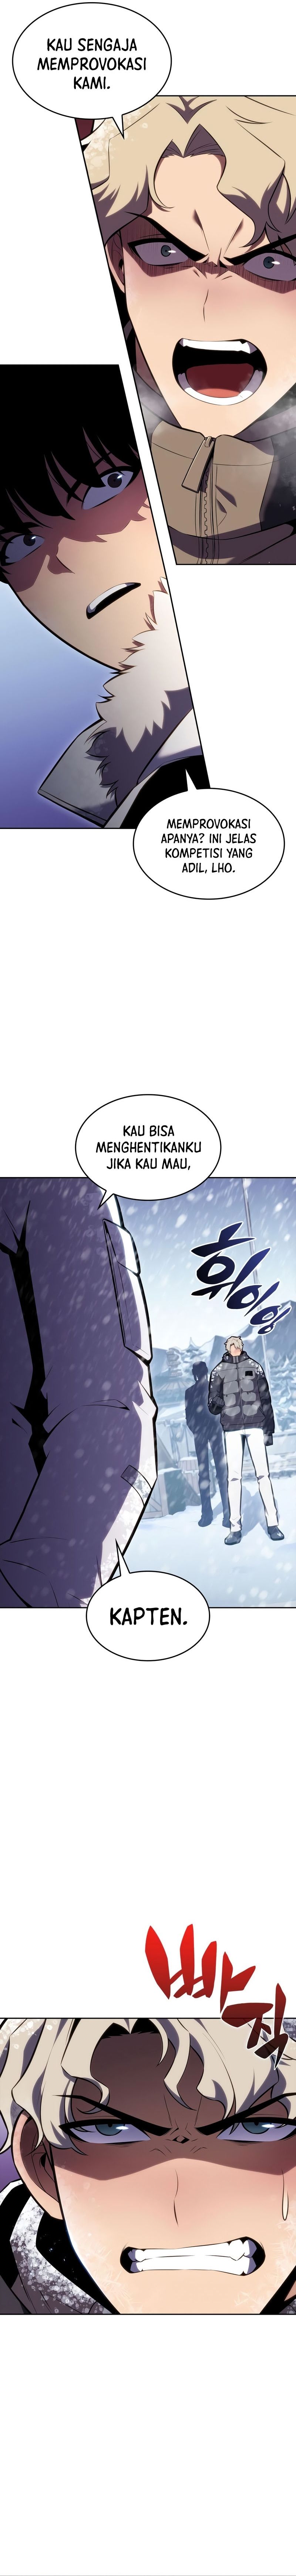 Solo Max-Level Newbie Chapter 84 Image 4